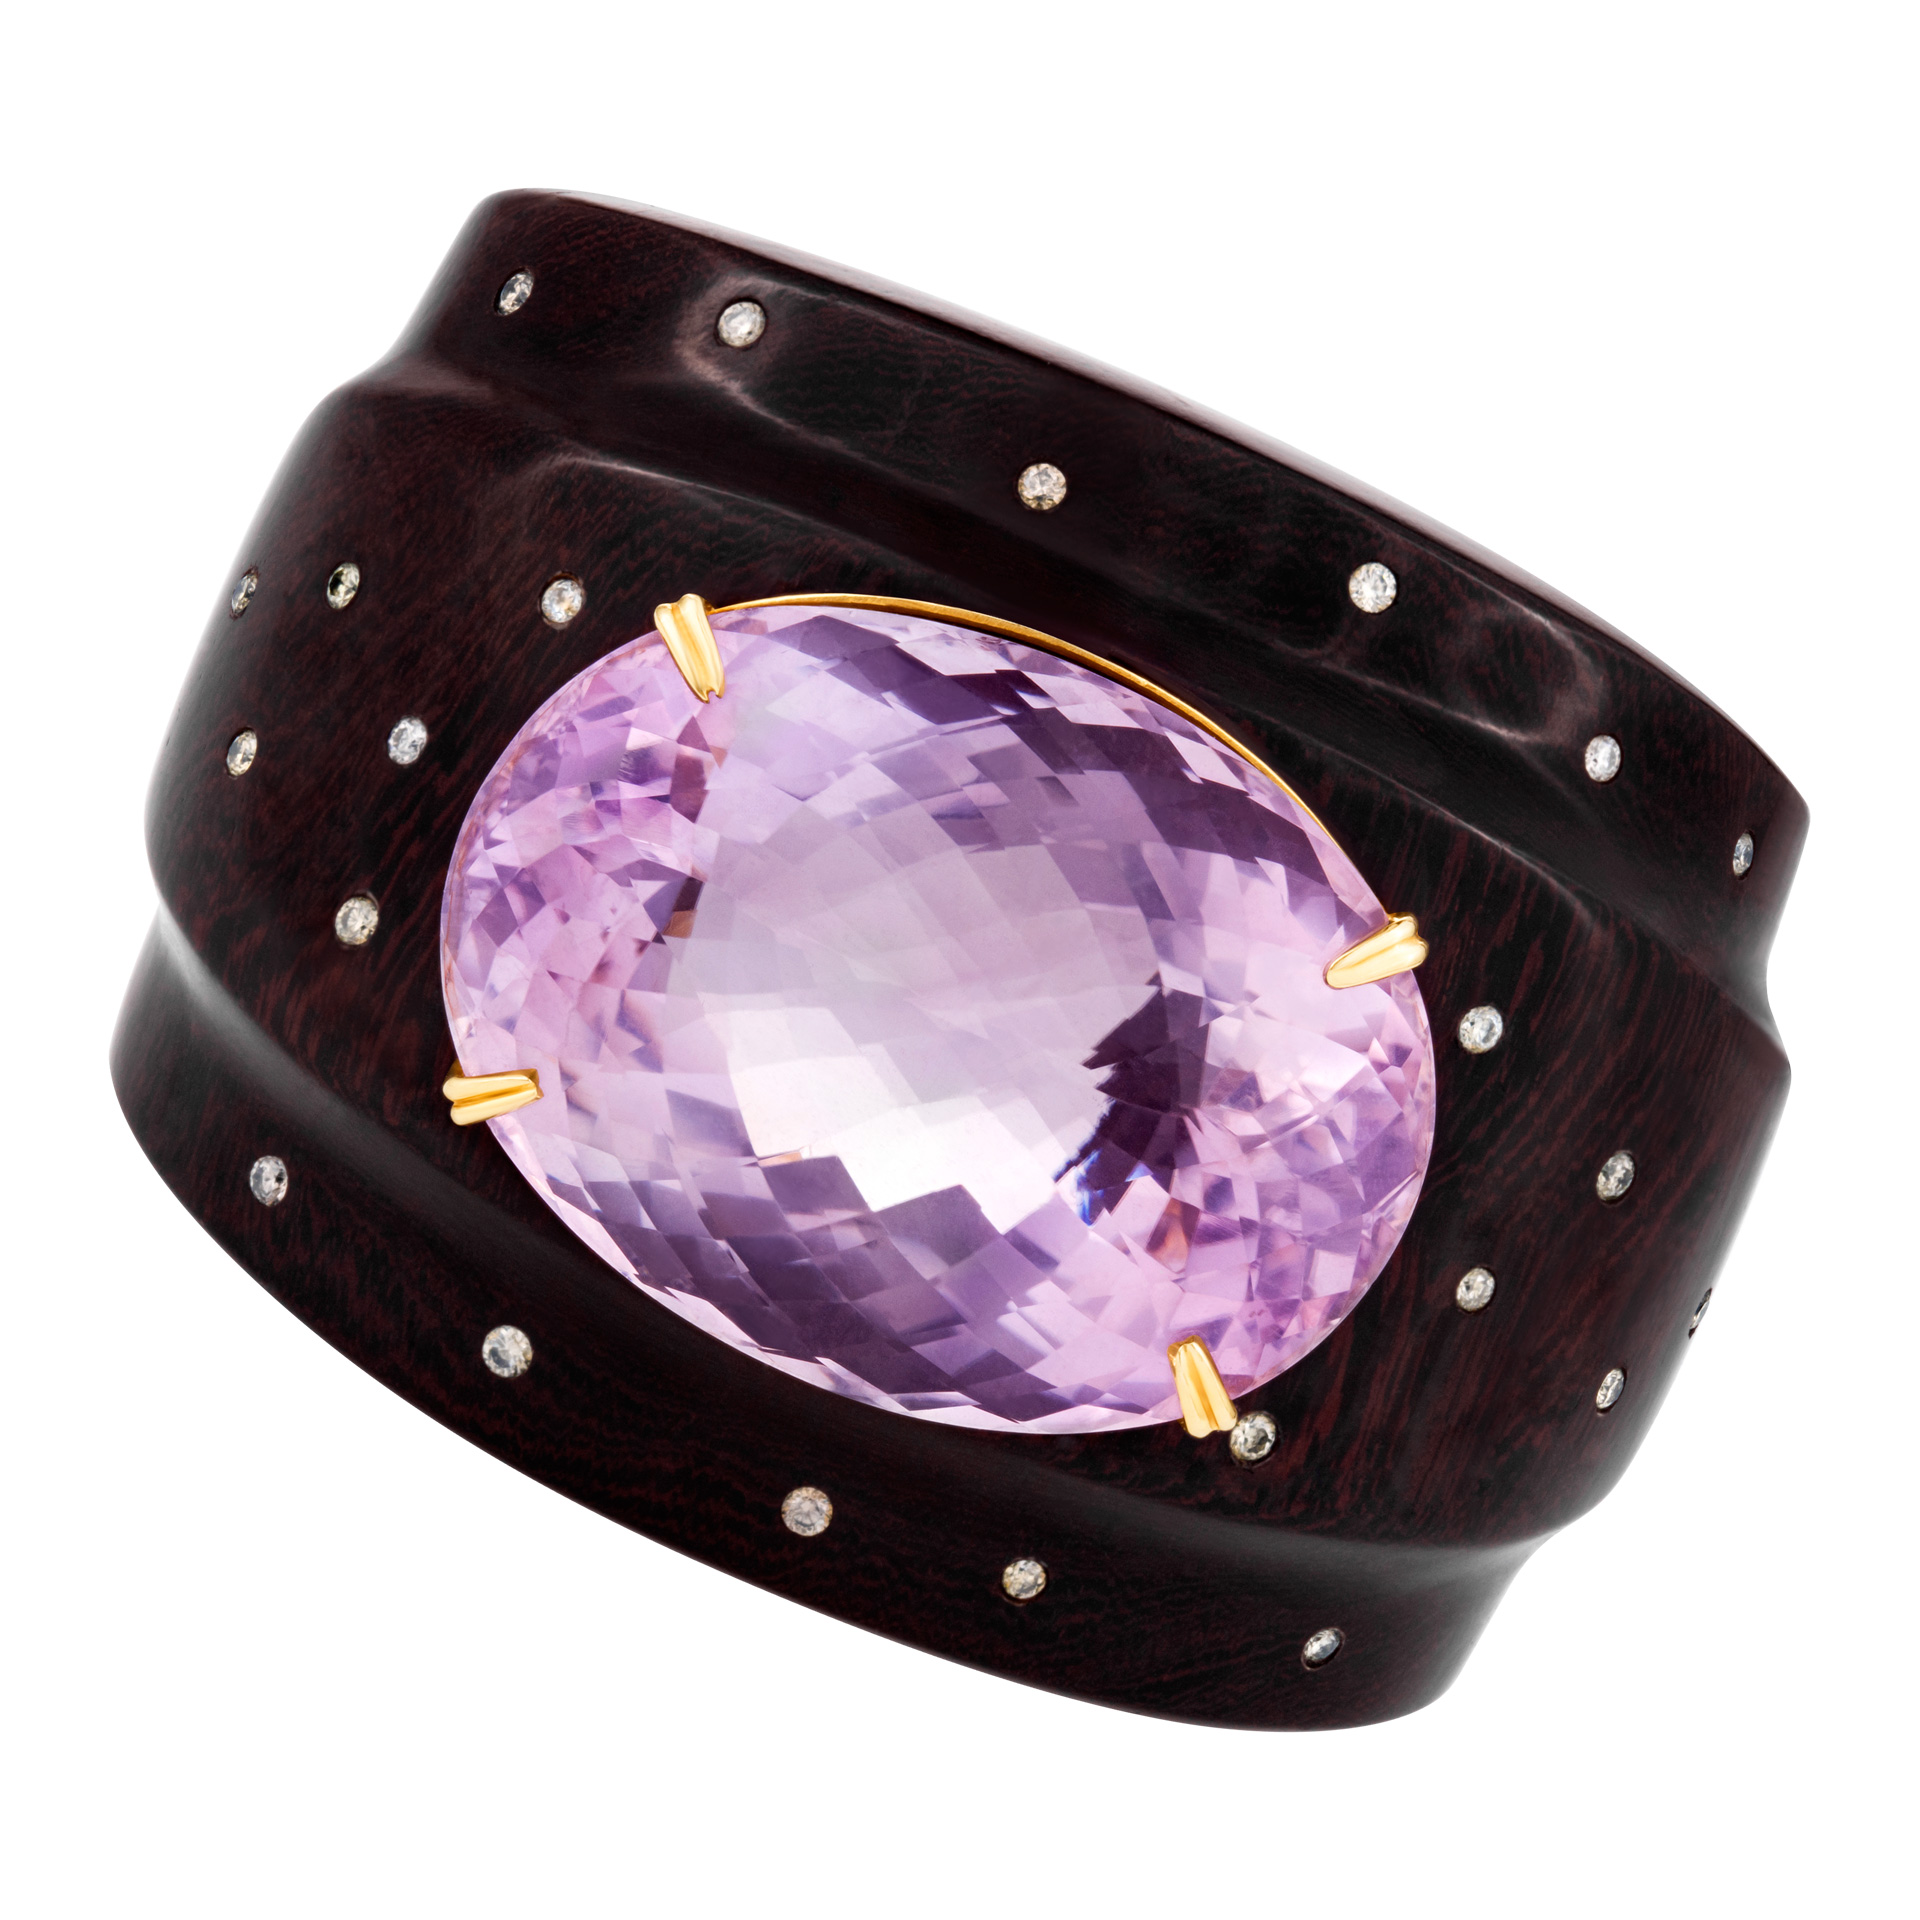 Sazingg cuff bangle in rosewood with center faceted Amethyst & diamond accents